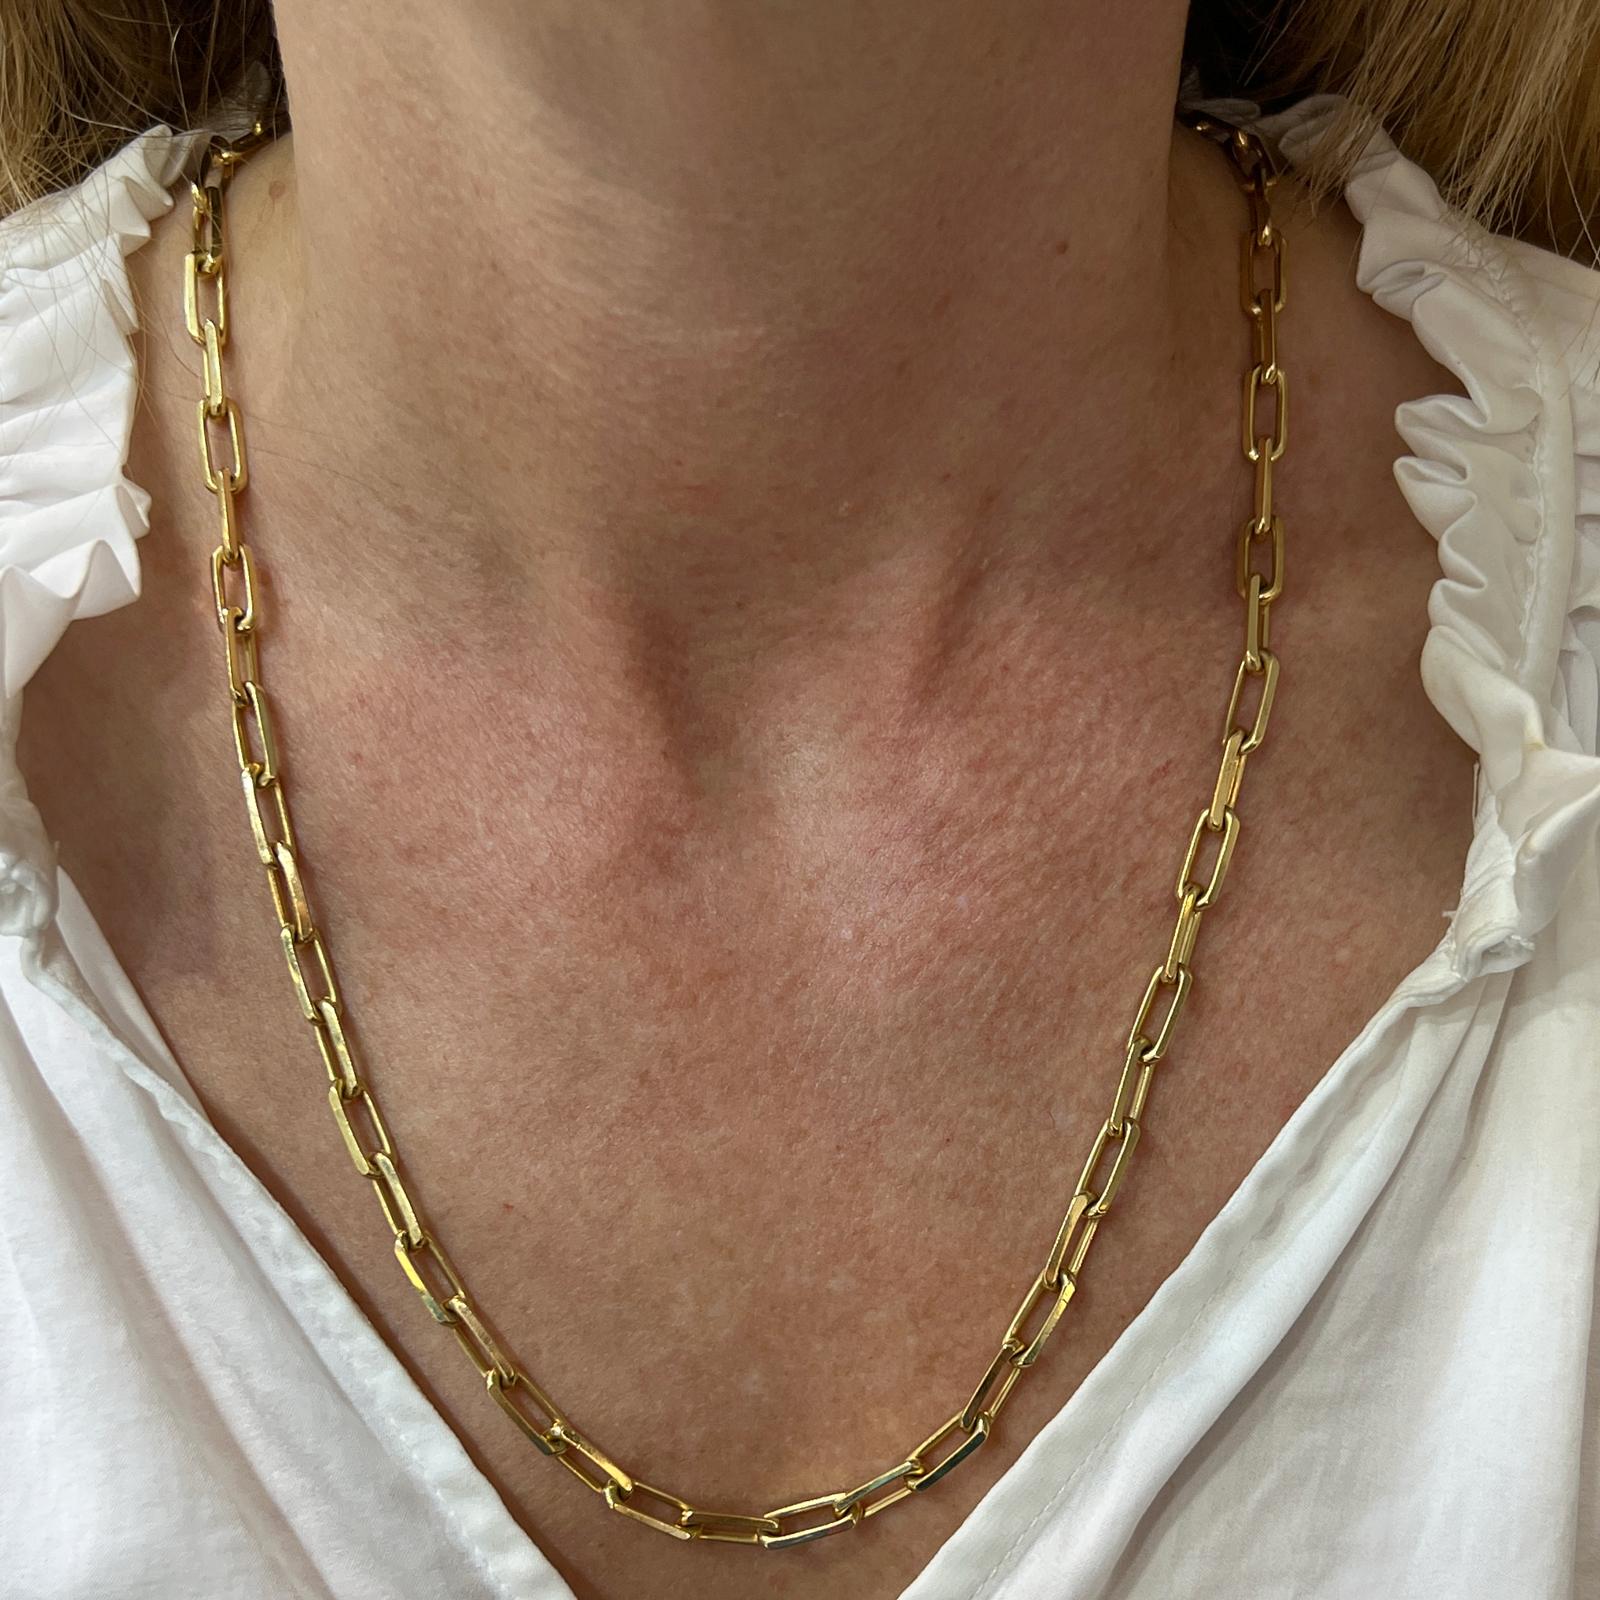 Cartier Santos Dumont oval link chain fashioned in 18 karat yellow gold. The link necklace measures 22.5 inches in length and comes with original box and papers. Purchased in 2018. Signed Cartier, numbered, and hallmarked. 
MSRP: $7,950.00